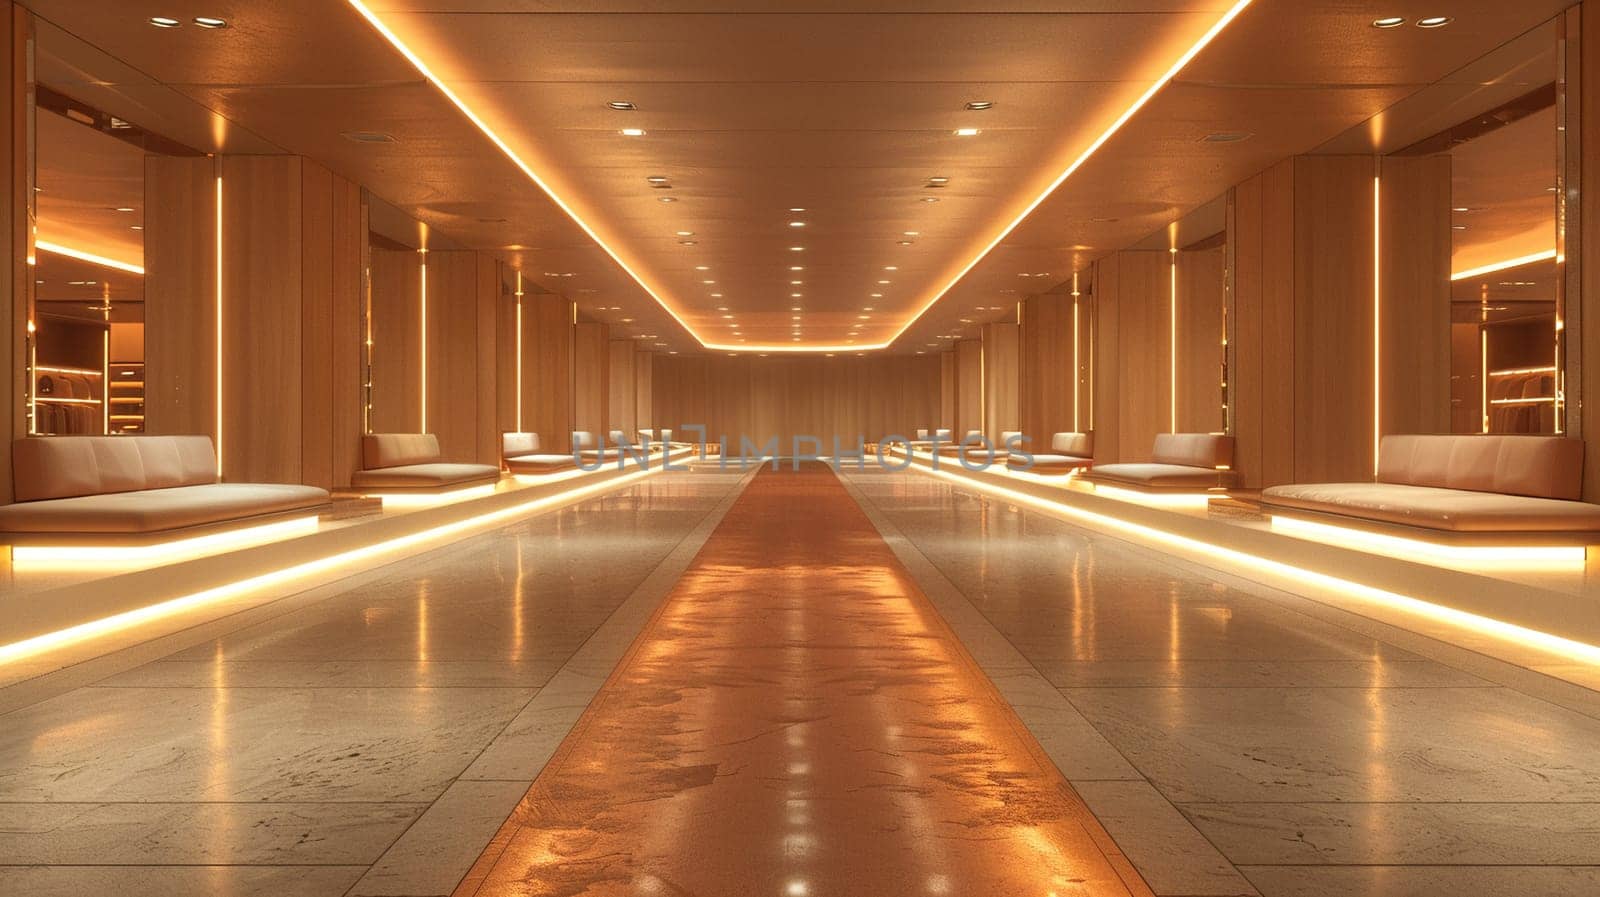 High-fashion dressing area with runway lighting and mirrored walls3D render.